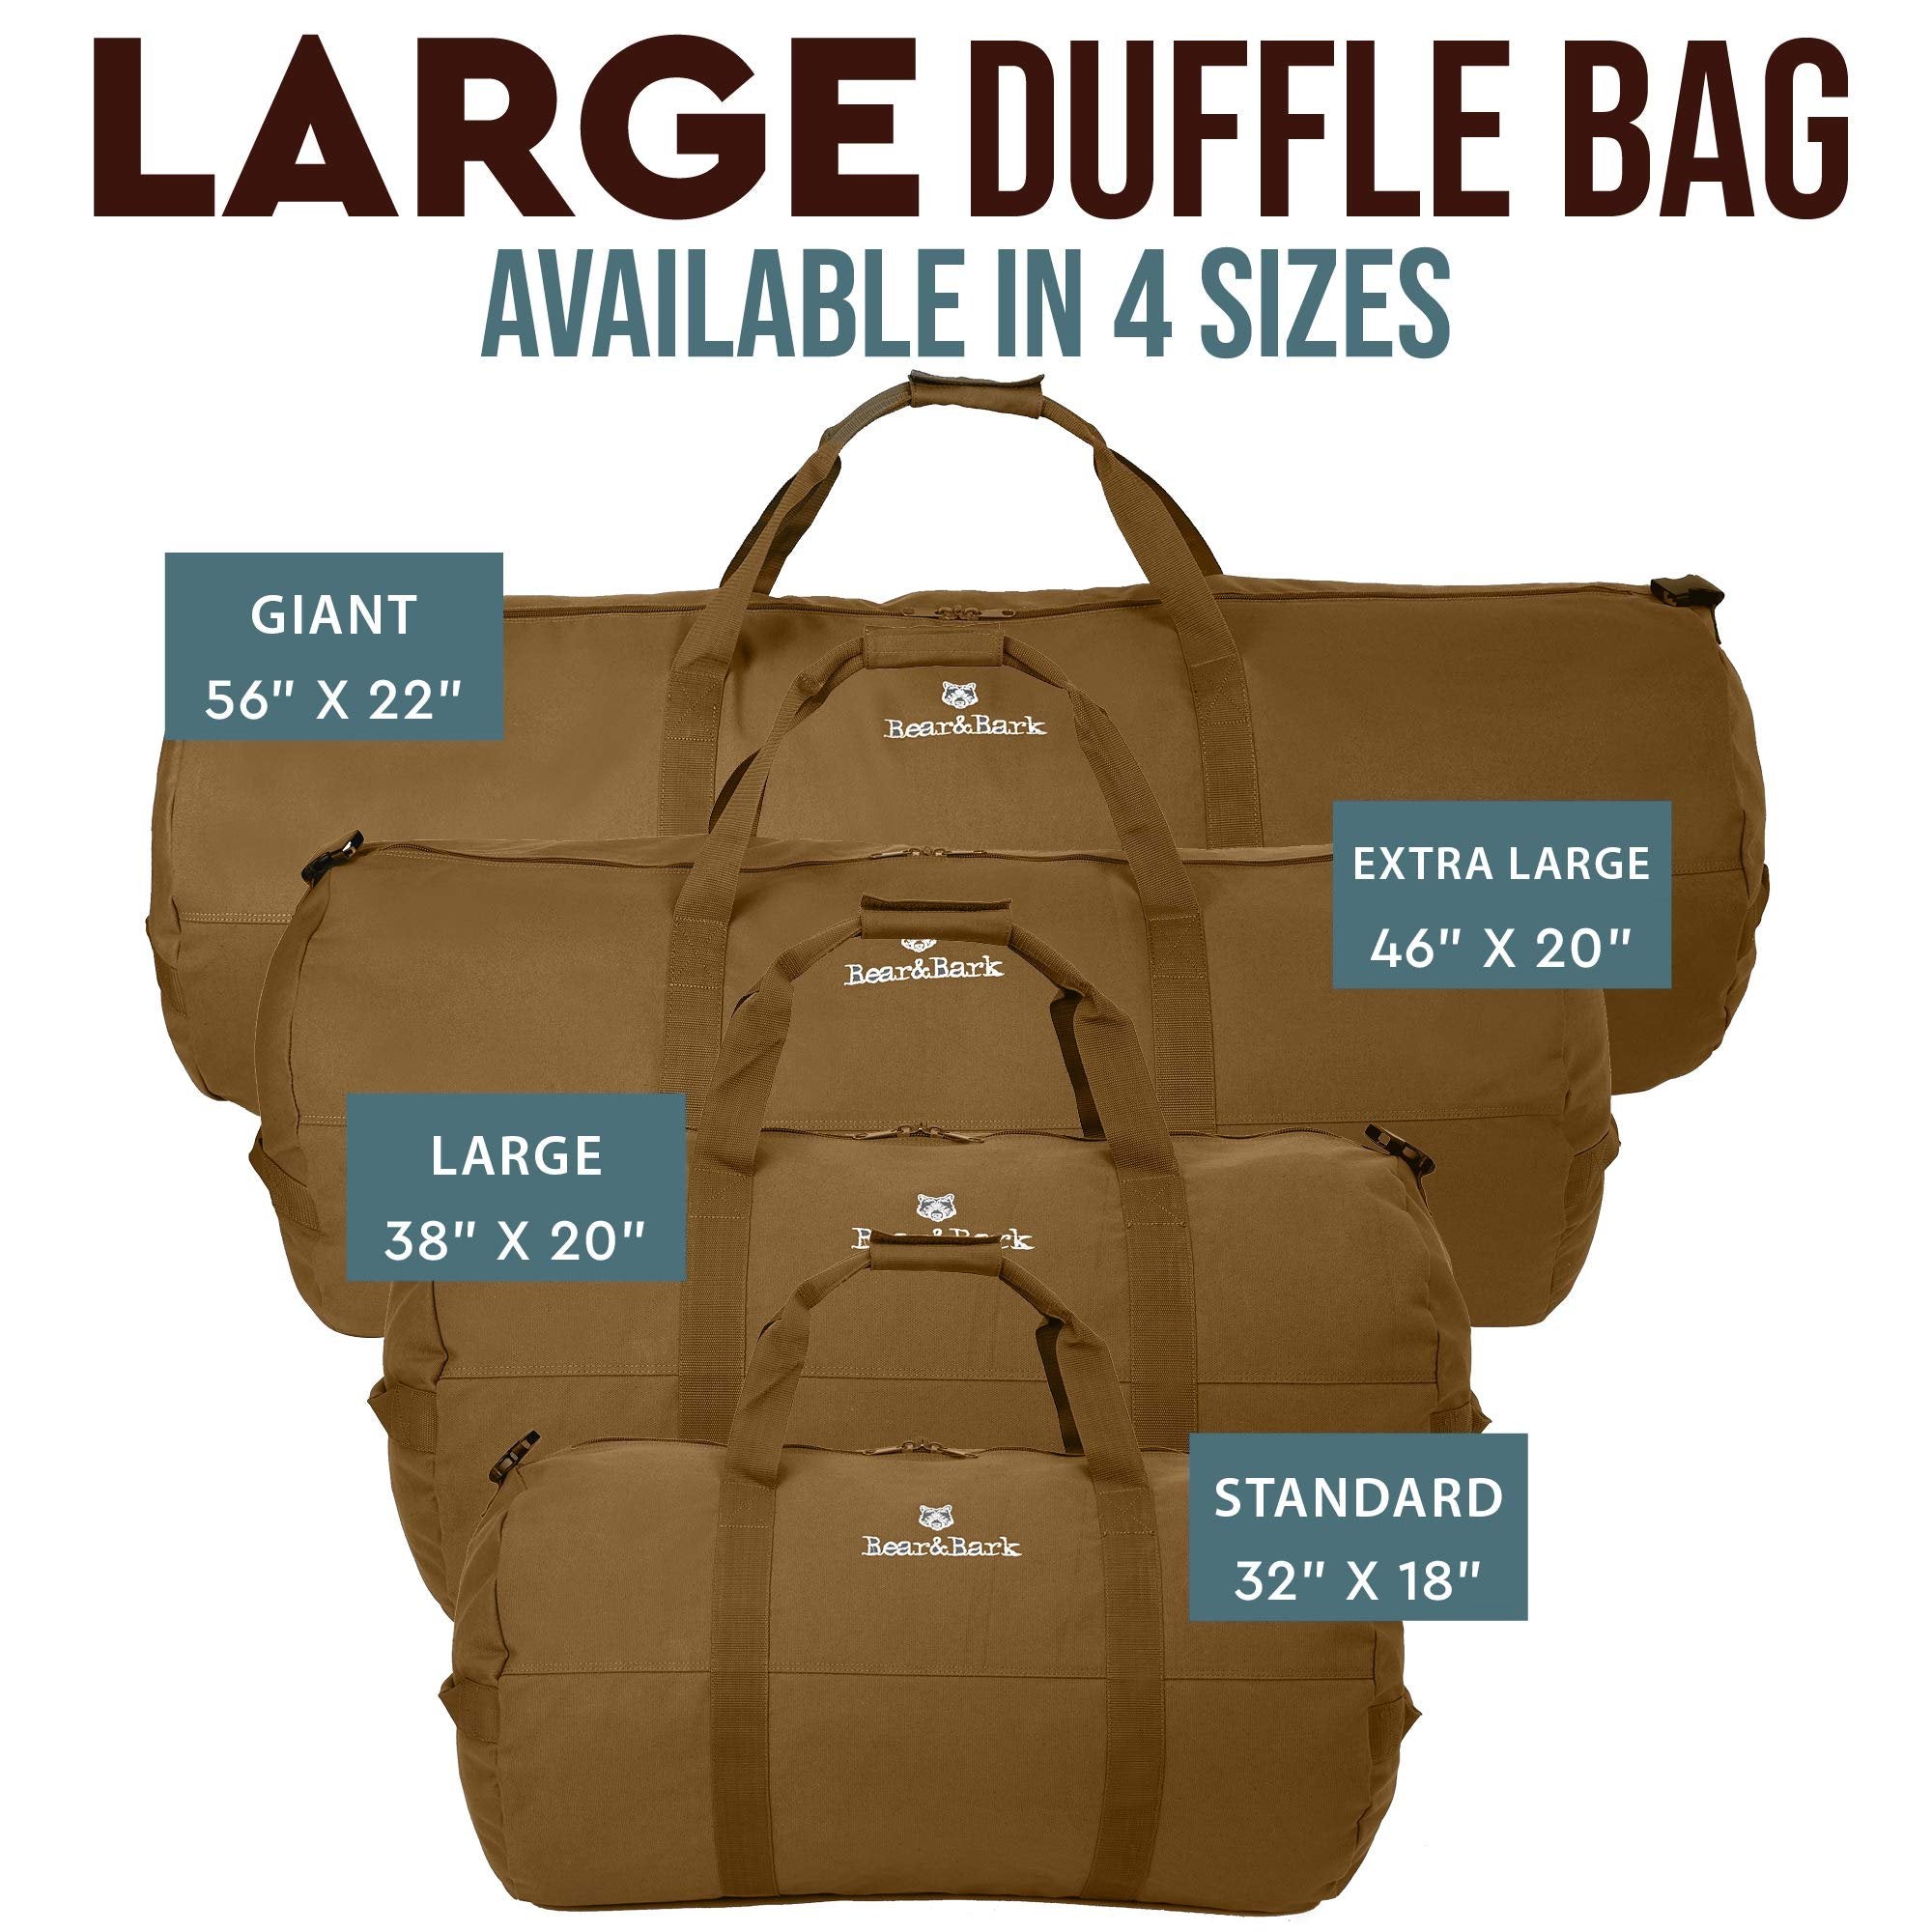 X-Large Desert Brown Canvas Duffle Bag - 46x20 - Military Army Cargo Style - 236.8L - Great for Travel, College, Backpacking & Storage